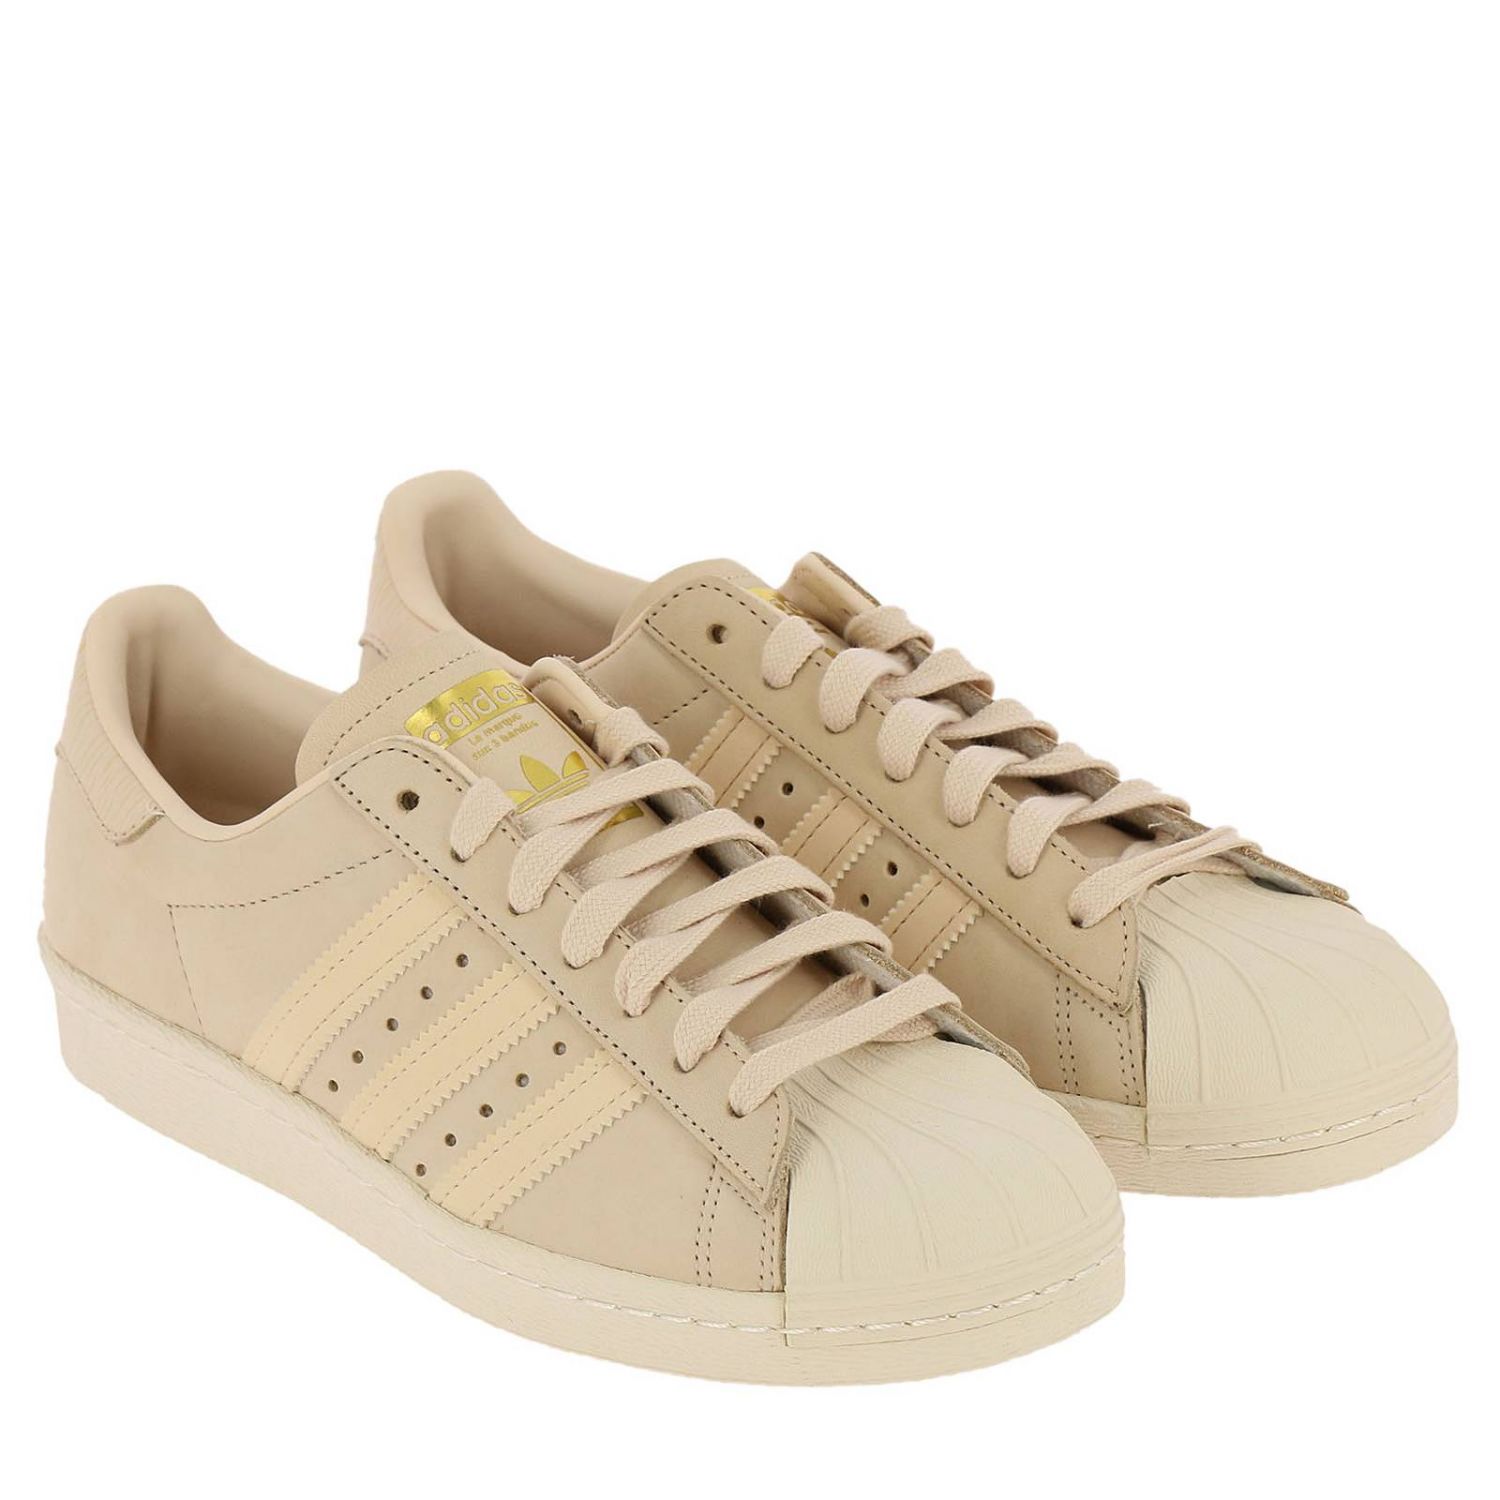 Adidas Originals Outlet Shoes women Sneakers Adidas Originals Women